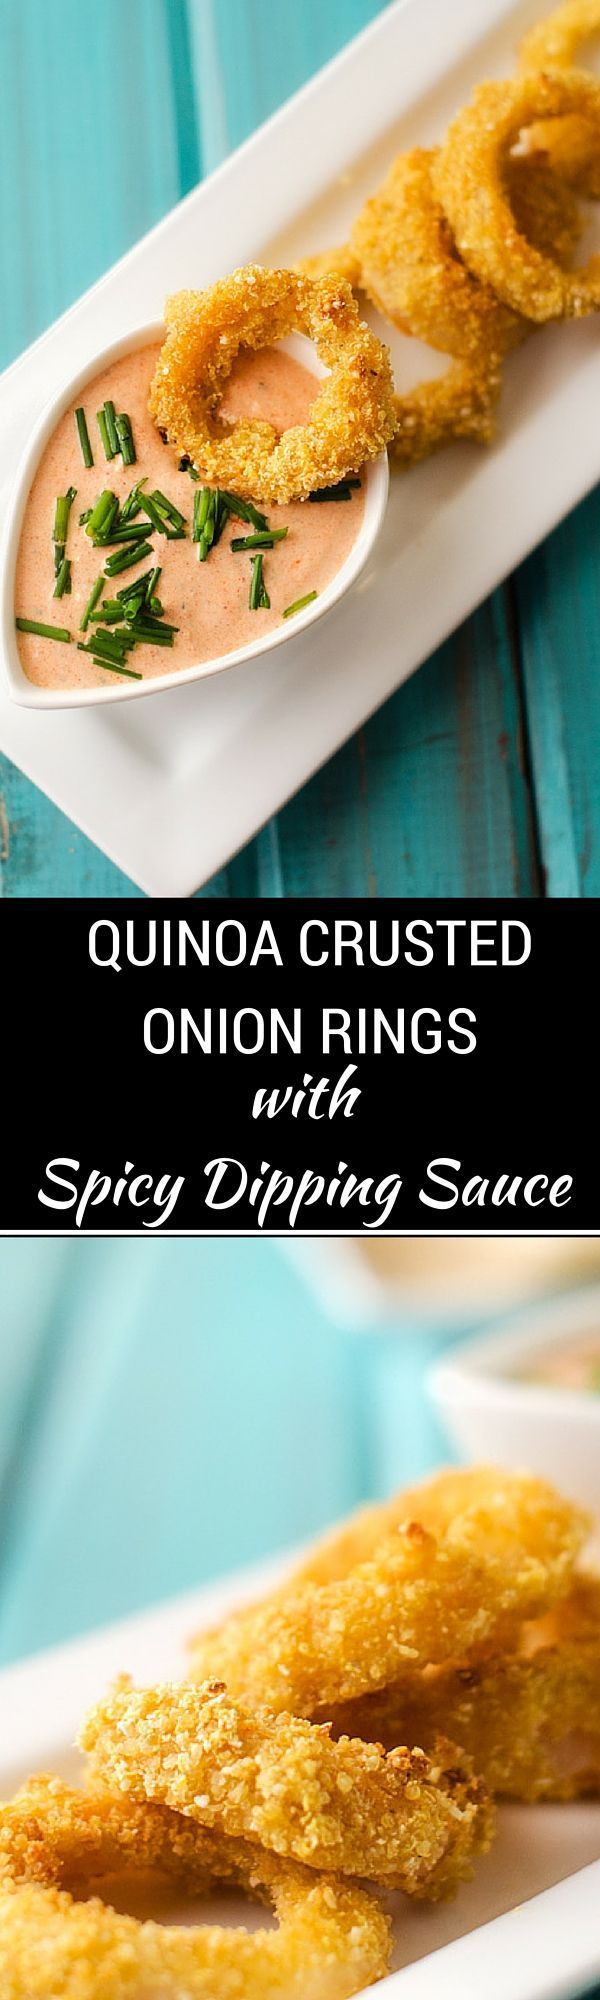 Quinoa Crusted Onion Rings with Spicy Dipping Sauce – These oven baked quinoa crusted onion rings are